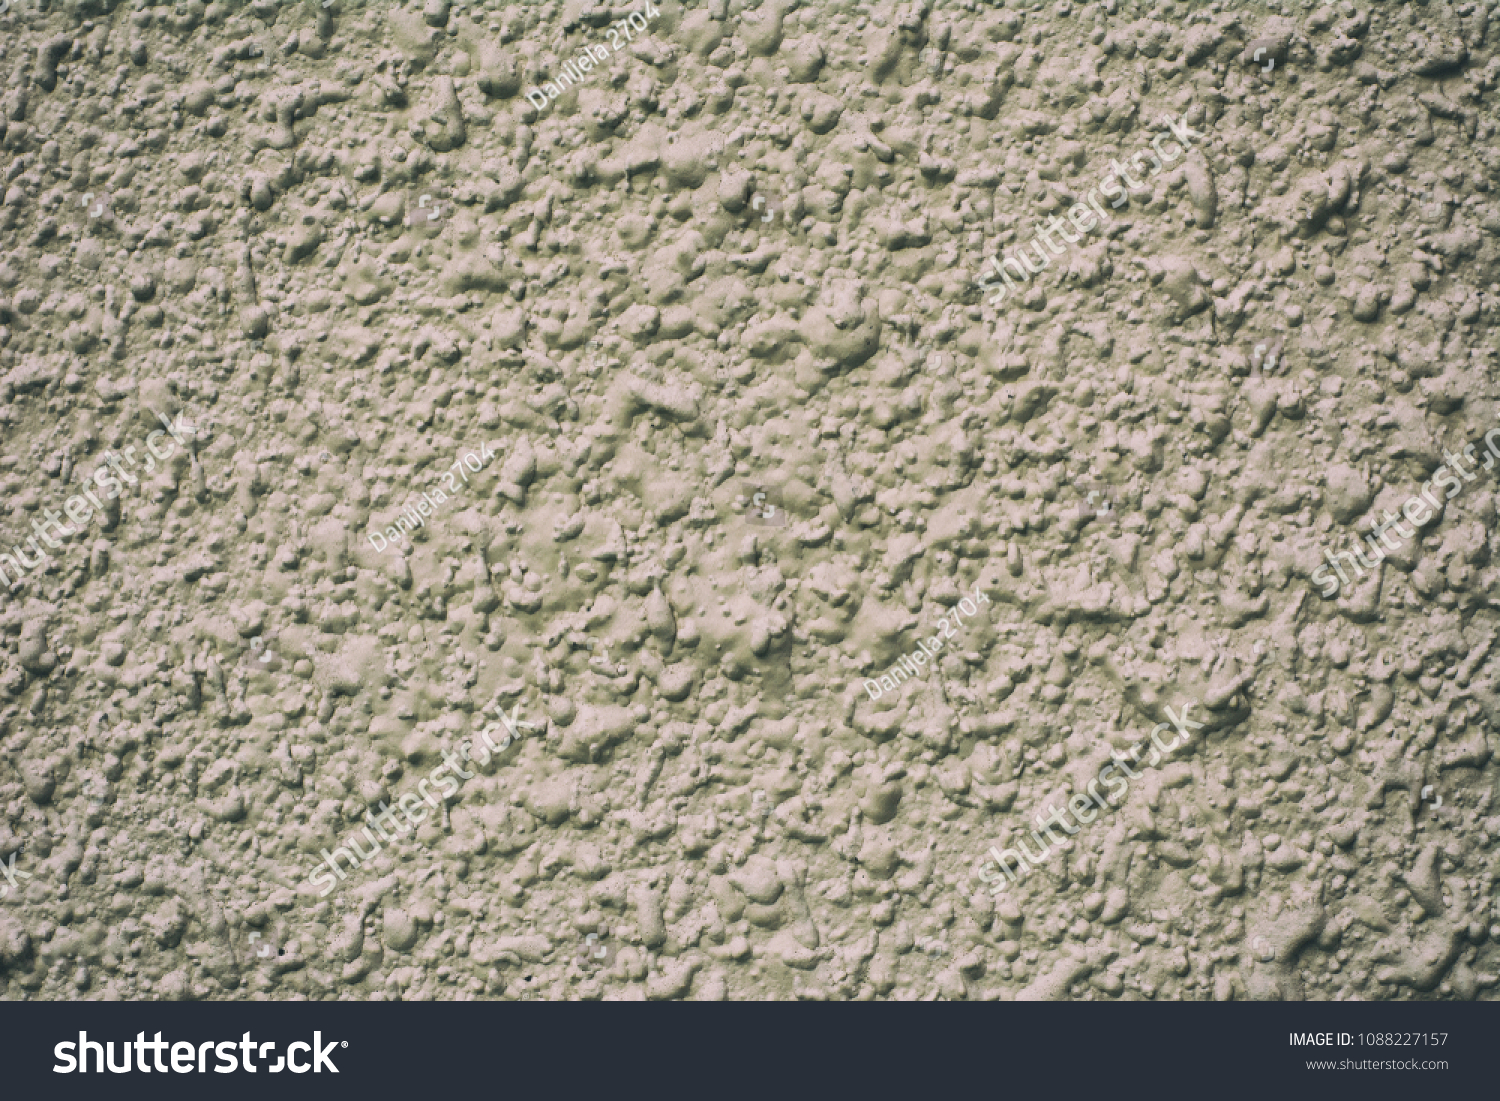 Old Concrete, Wall - Building Feature, Textured, Textured Effect, Backgrounds  #1088227157